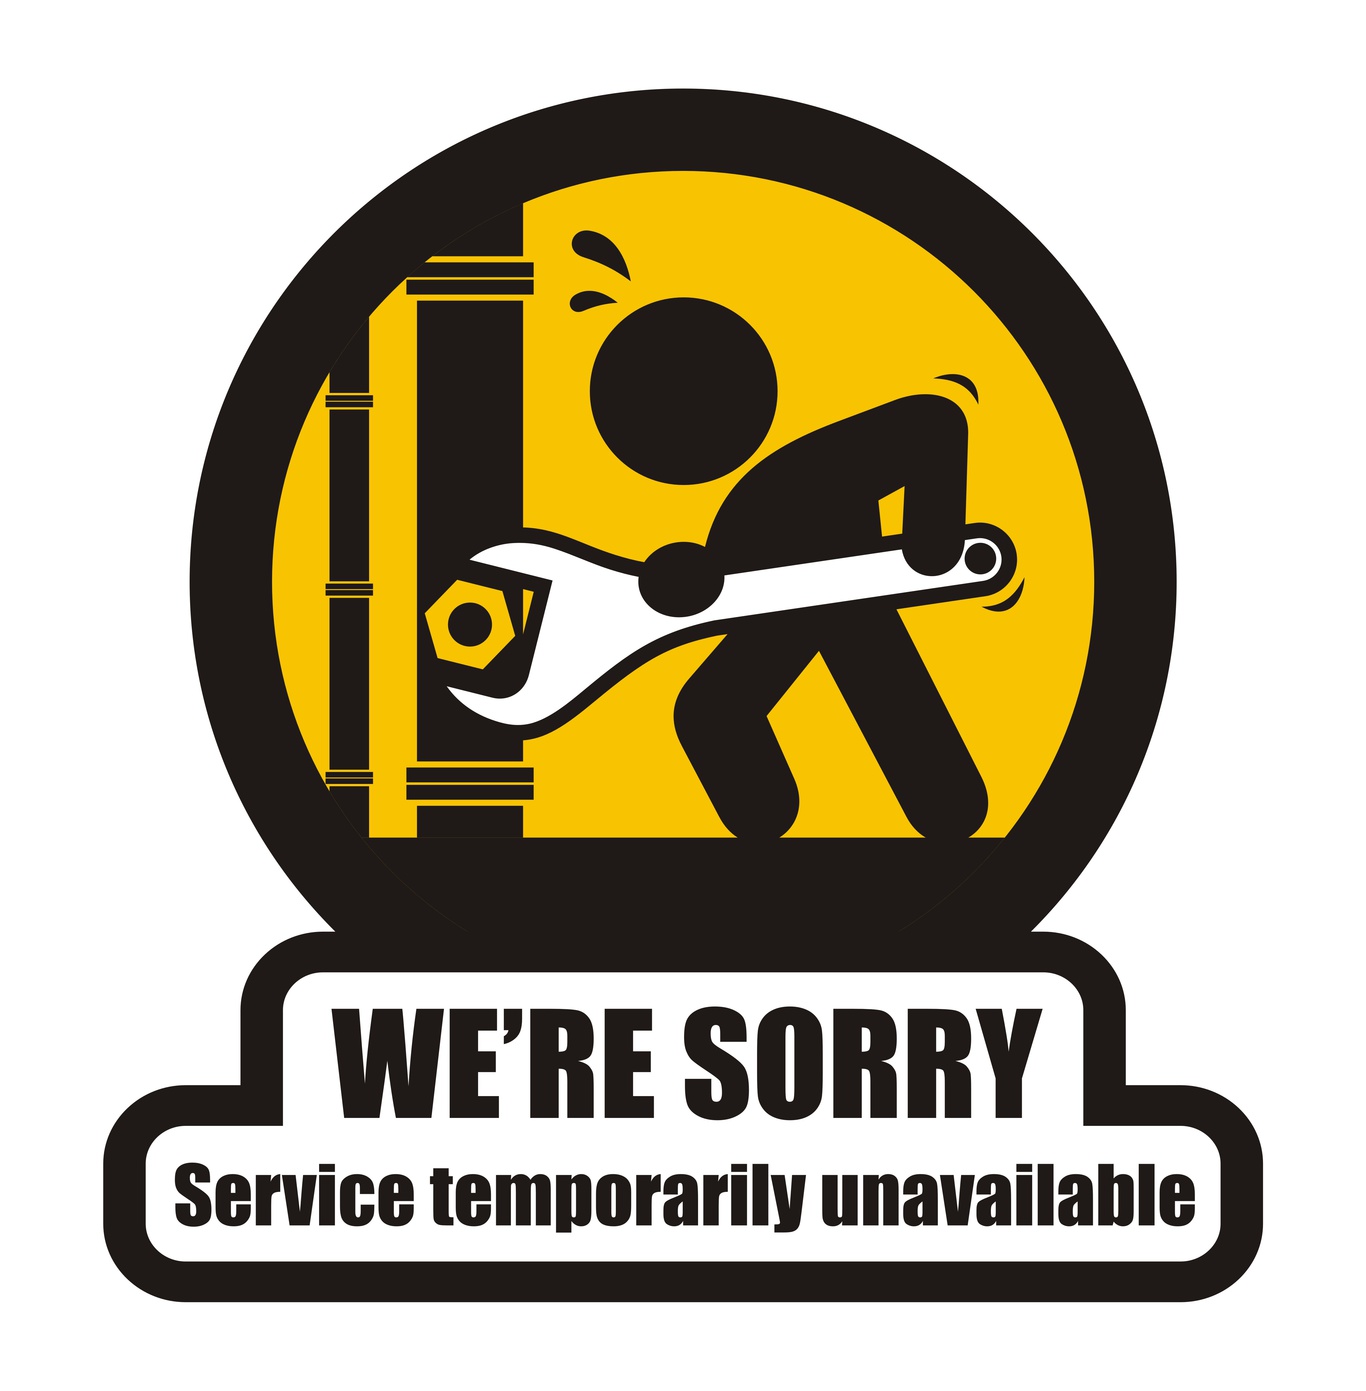 Steam service is temporarily unavailable фото 3